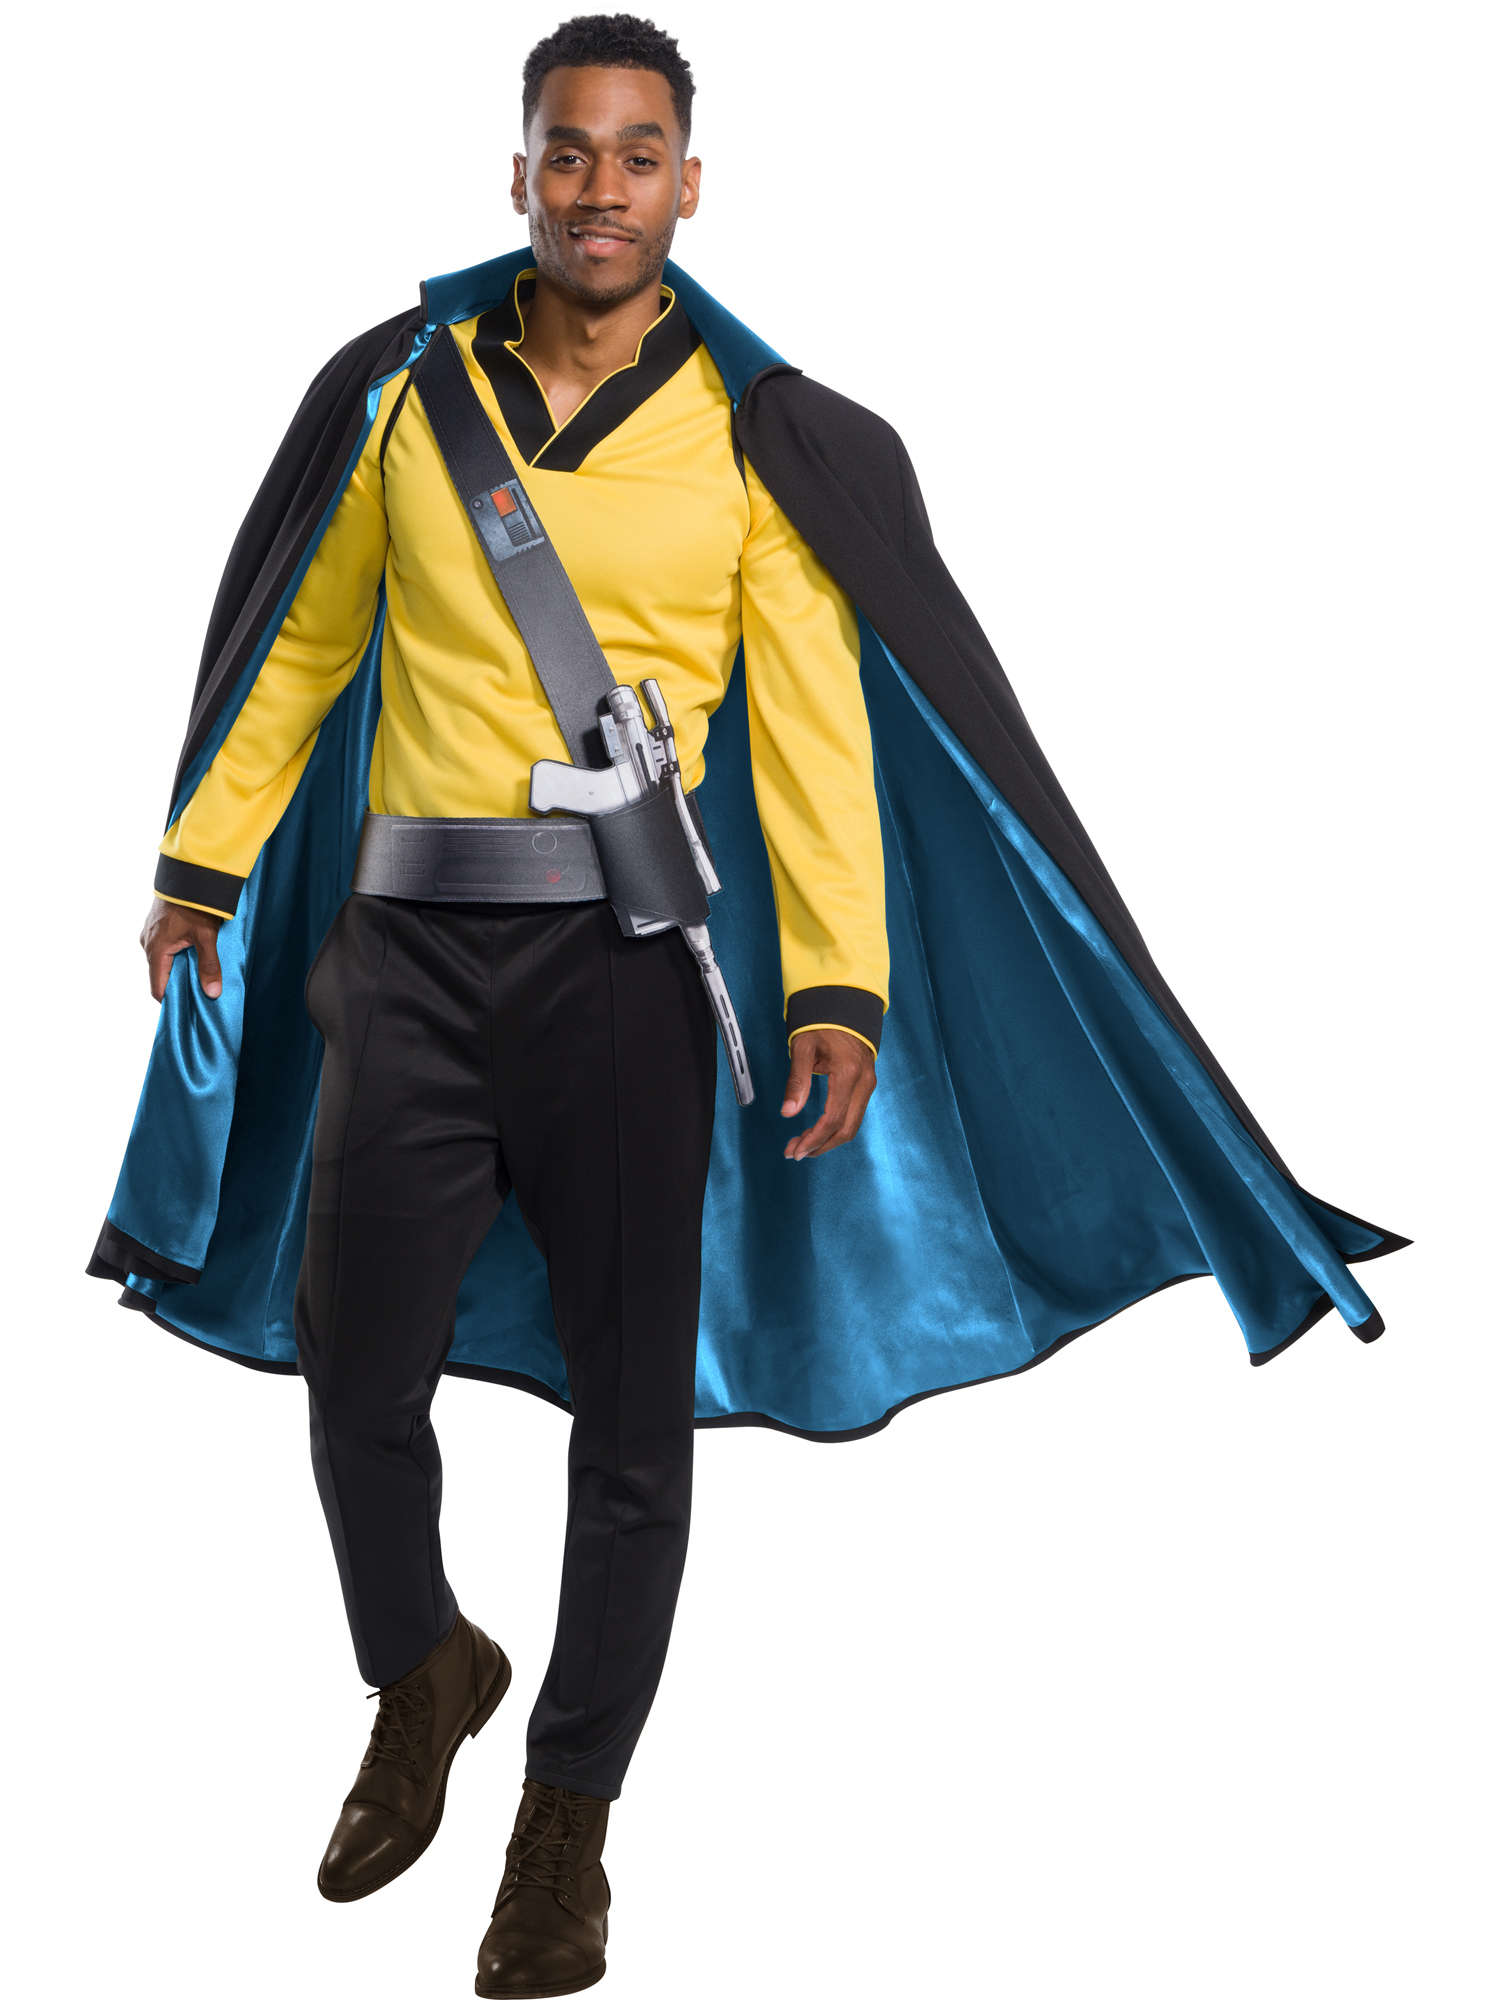 Lando Calrissian, The Rise Of Skywalker, Episode IX, The Rise Of Skywalker, Multi, Star Wars, Adult Costume, Extra Large, Front